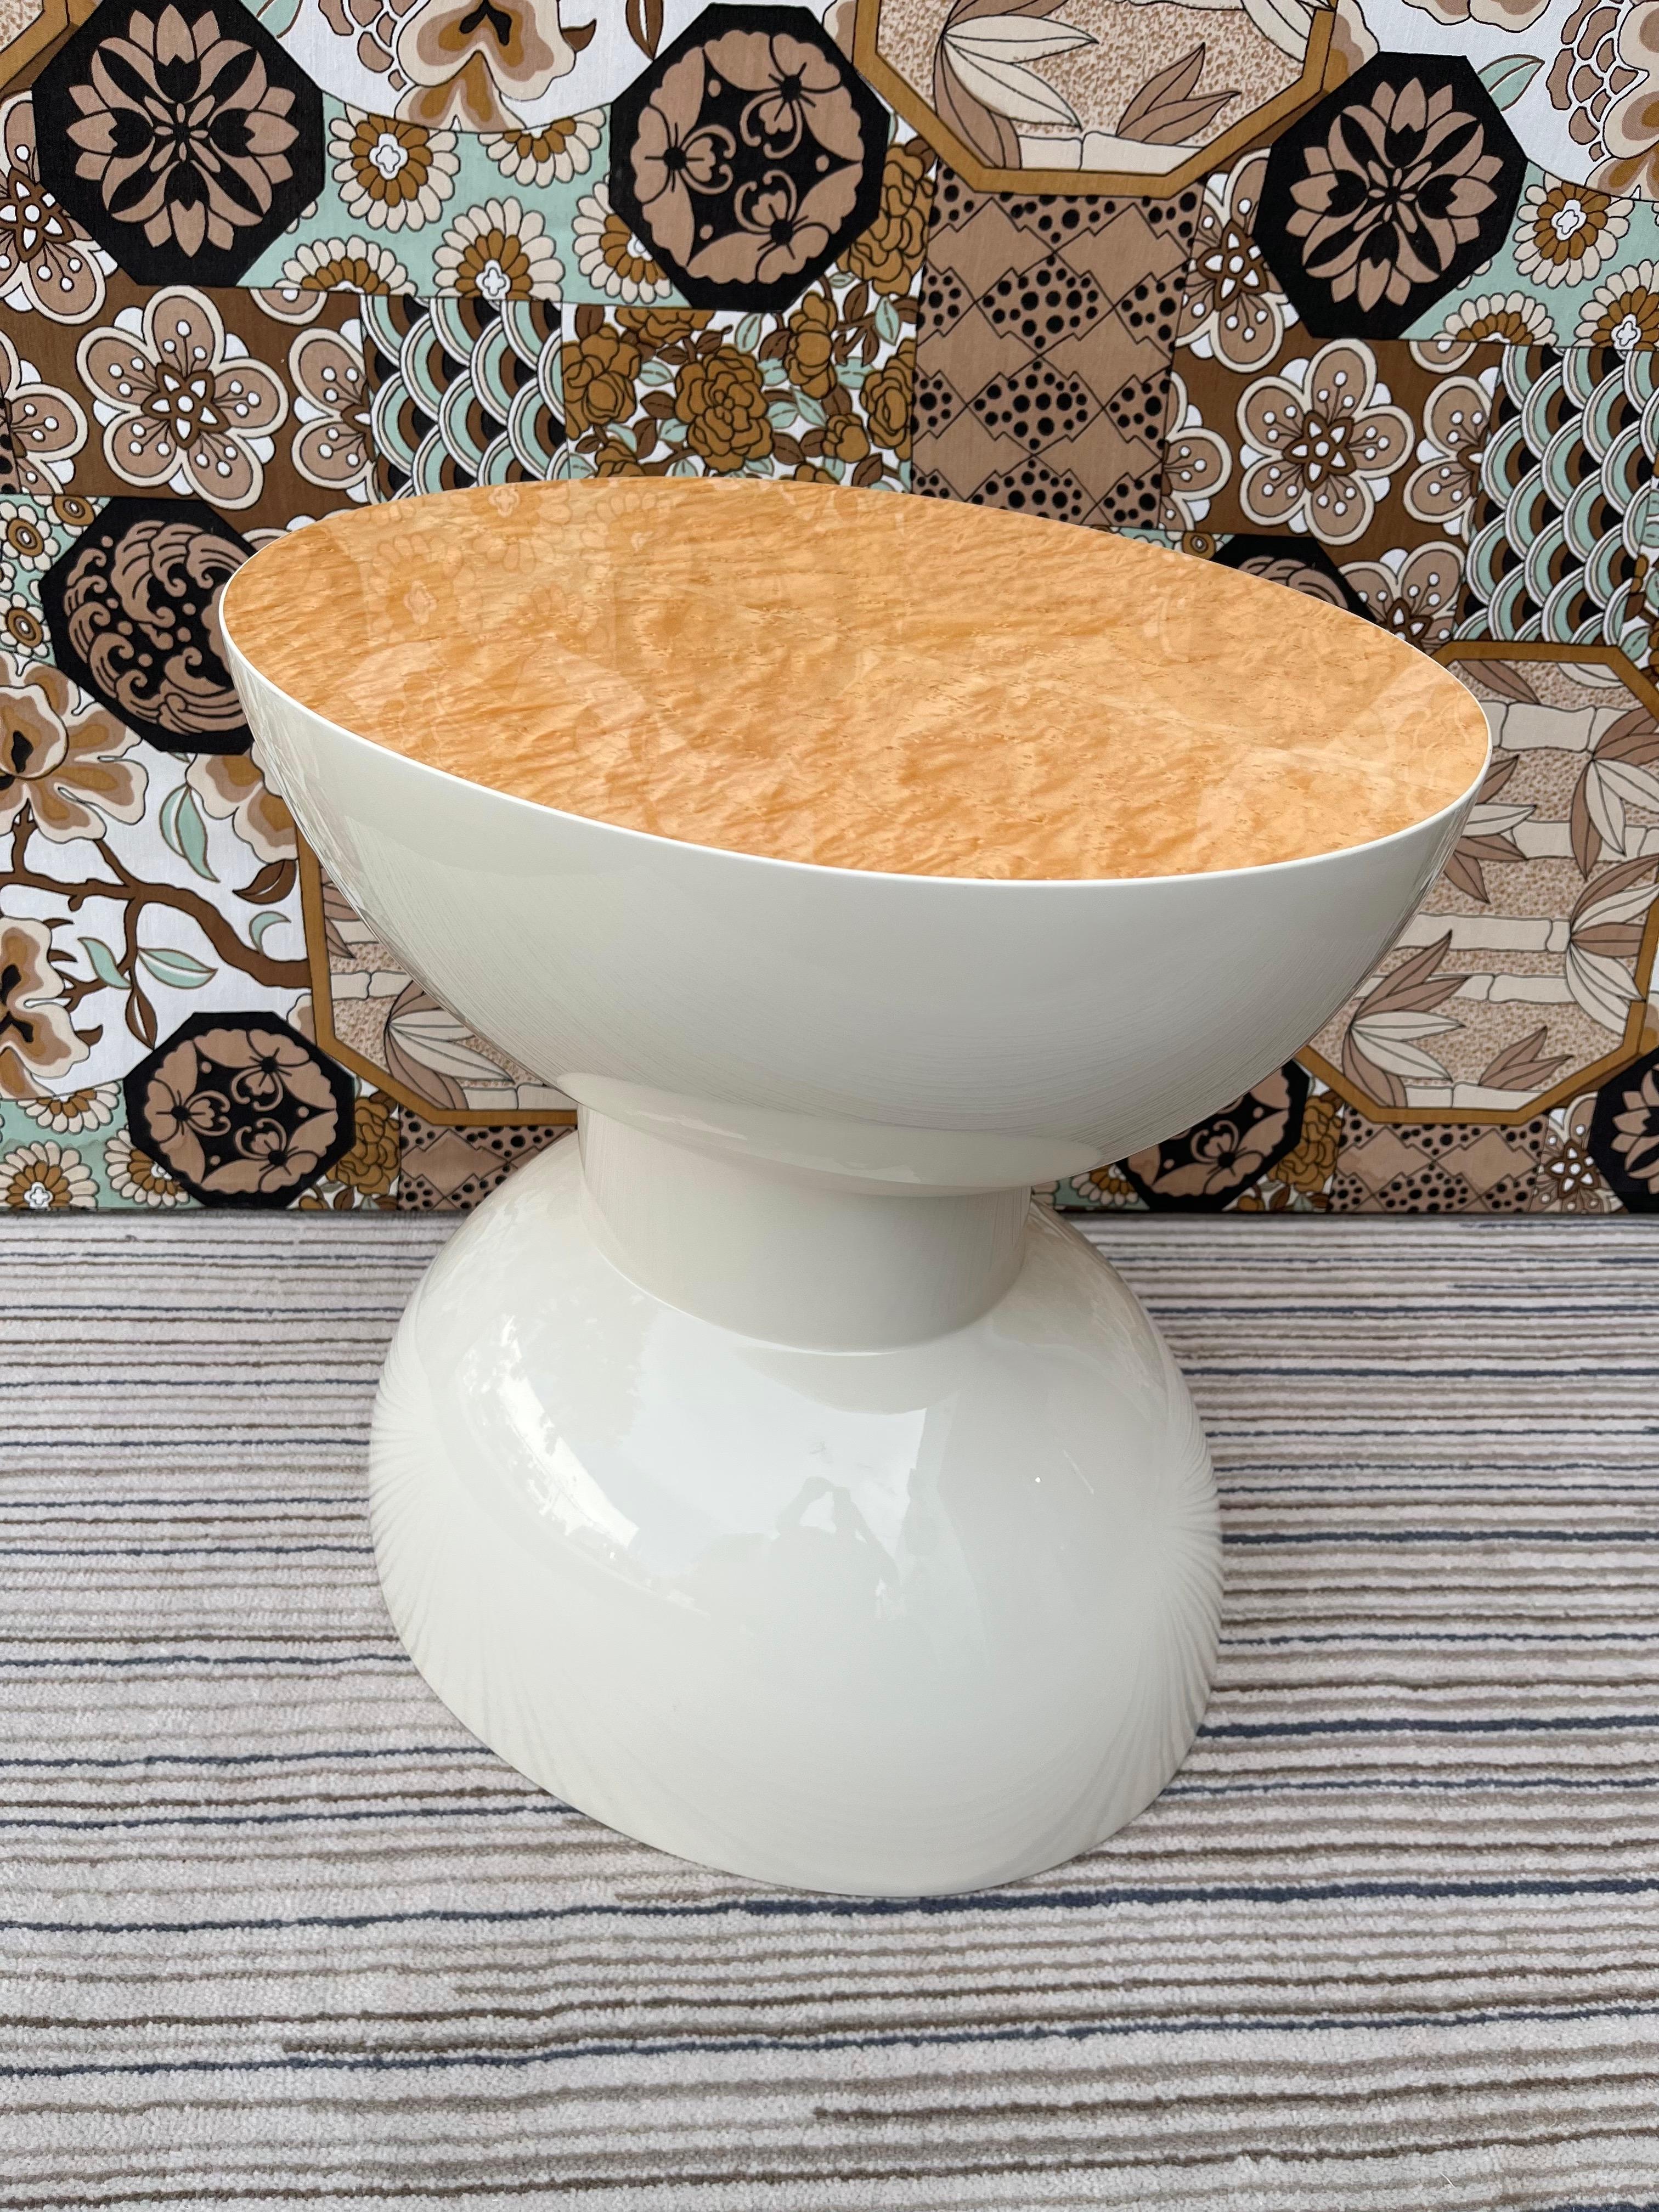 Preowned Contemporary Morocco side or accent table by the Wendell Castle Collection Rochester, NY. Signed at the bottom by the Designer. Circa 2010-2020s. 
On both top and bottom, the hemispherical shape of the Morocco side table allows light to